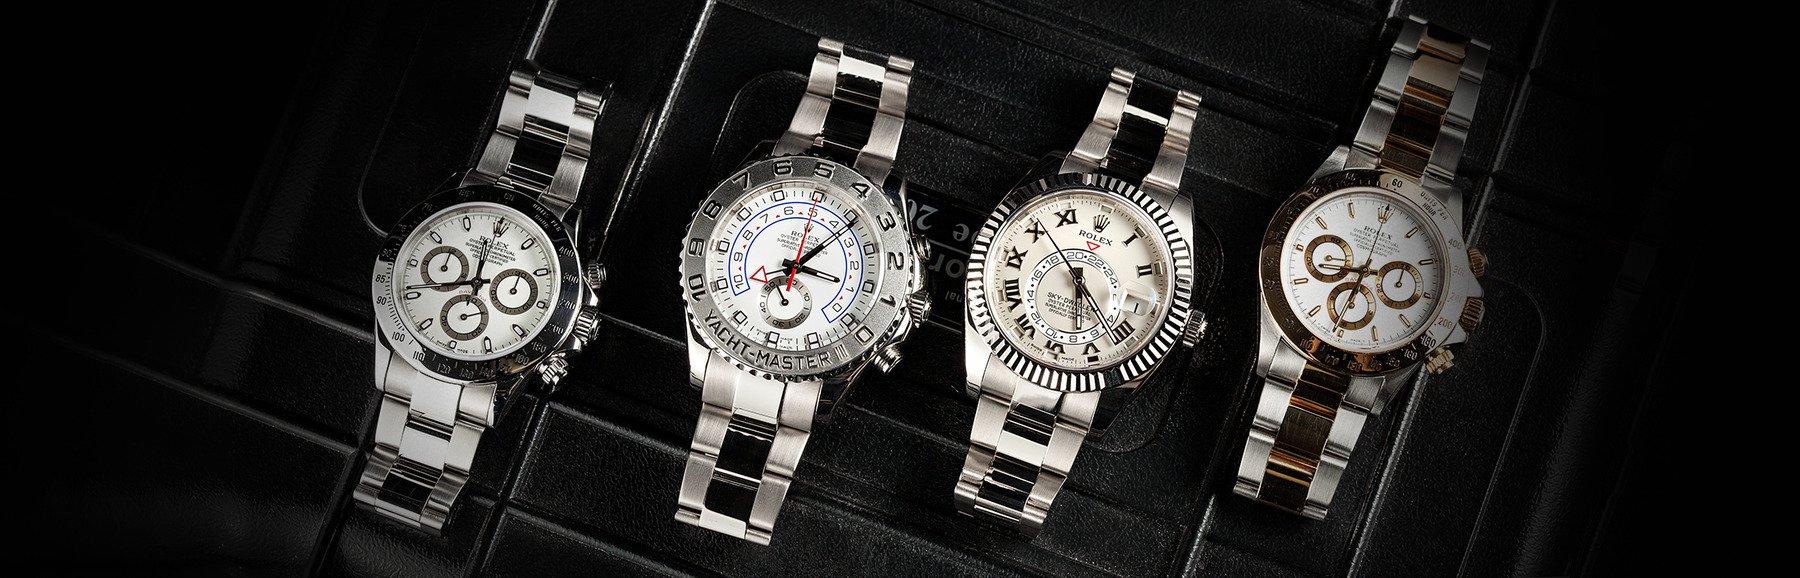 Rolex Reference Numbers – How to Tell the Difference Between 4, 5, and 6 Digit